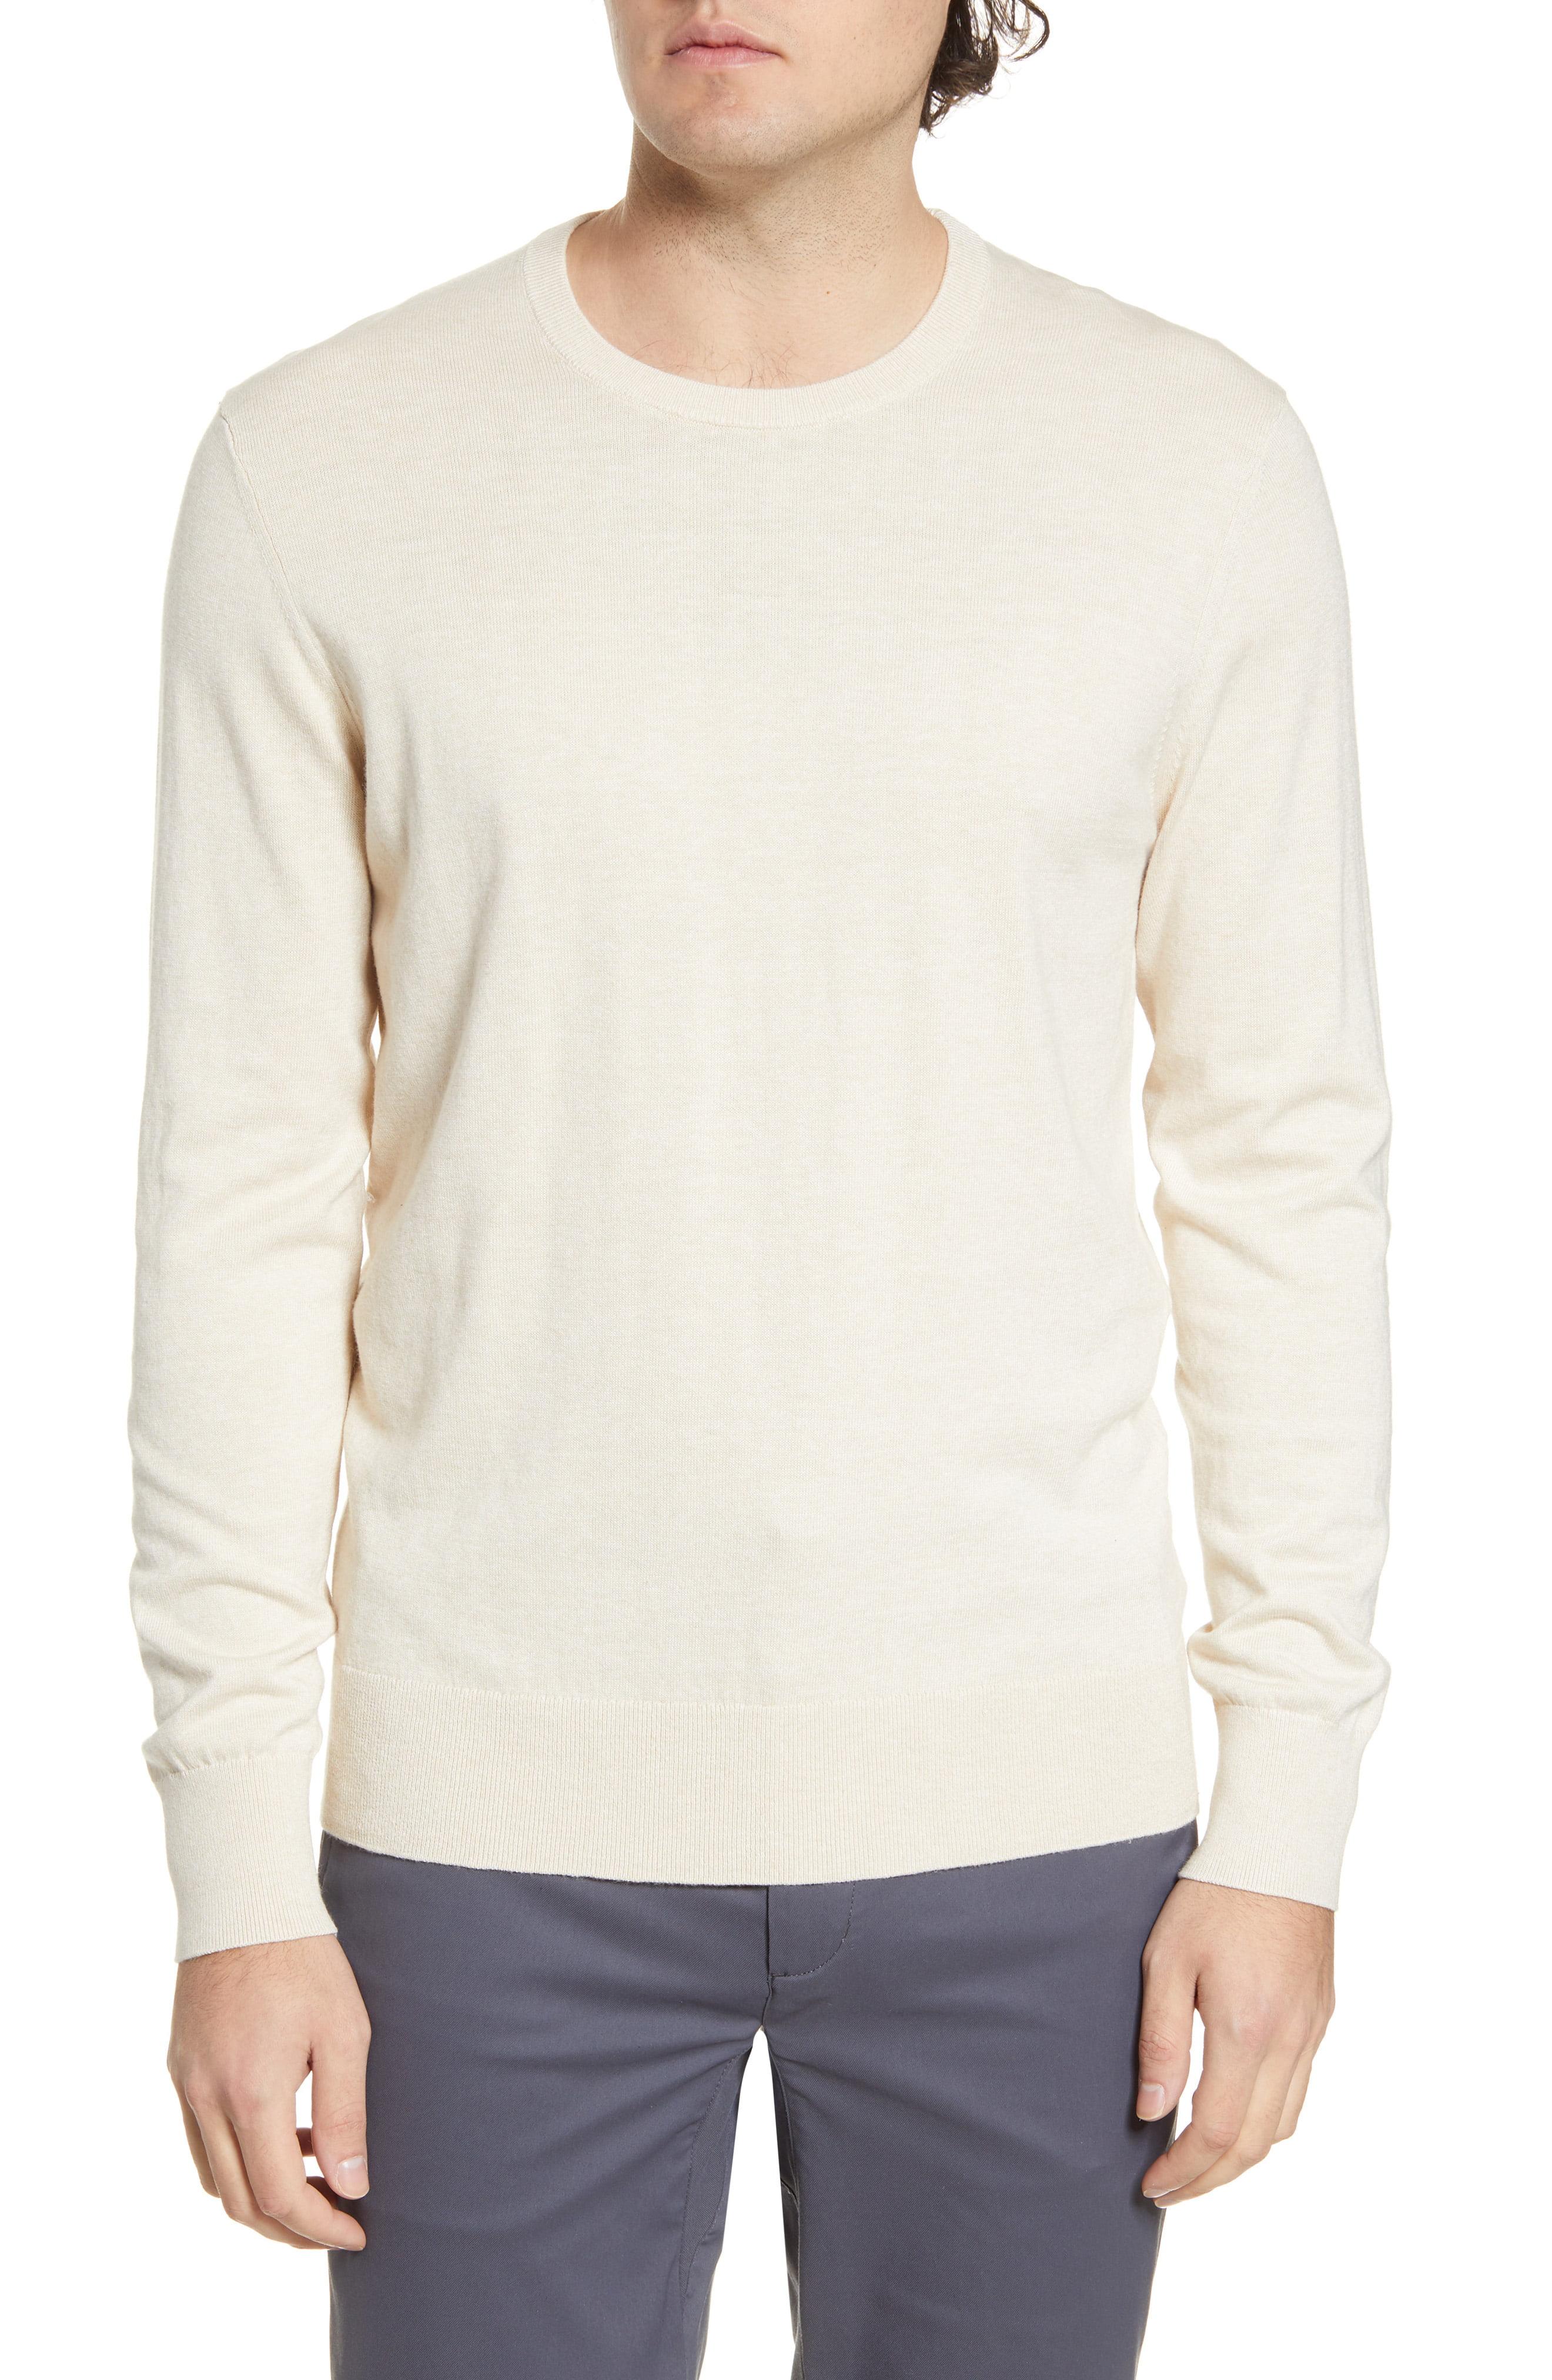 Tommy John Second Skin Cotton Blend Crewneck Sweater in Oatmeal Heather ...